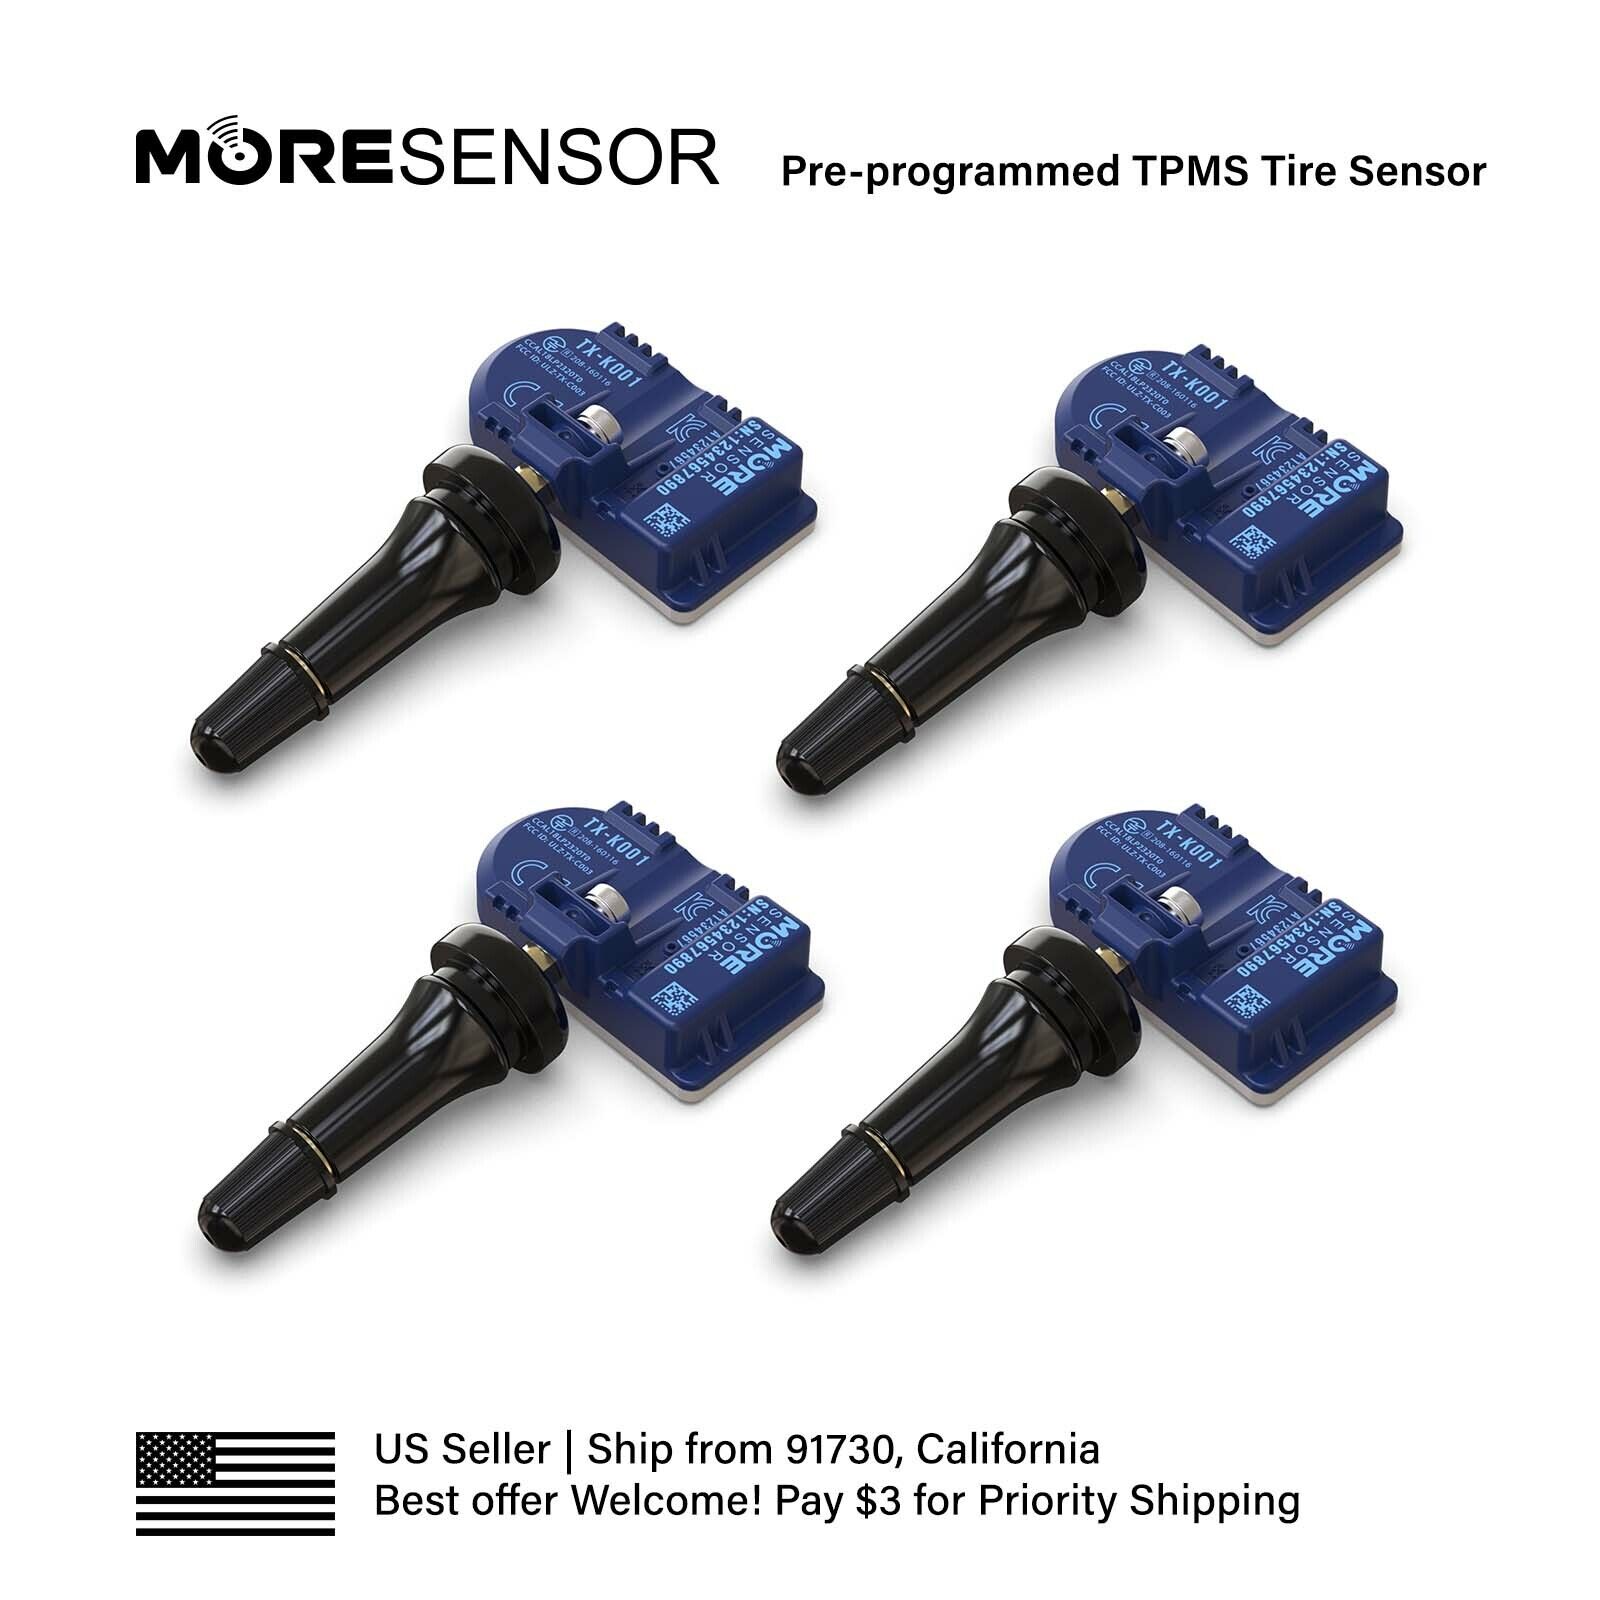 4PC 433MHz MORESENSOR TPMS Snap-in Tire Sensor for Altima Murano Pathfinder Q50